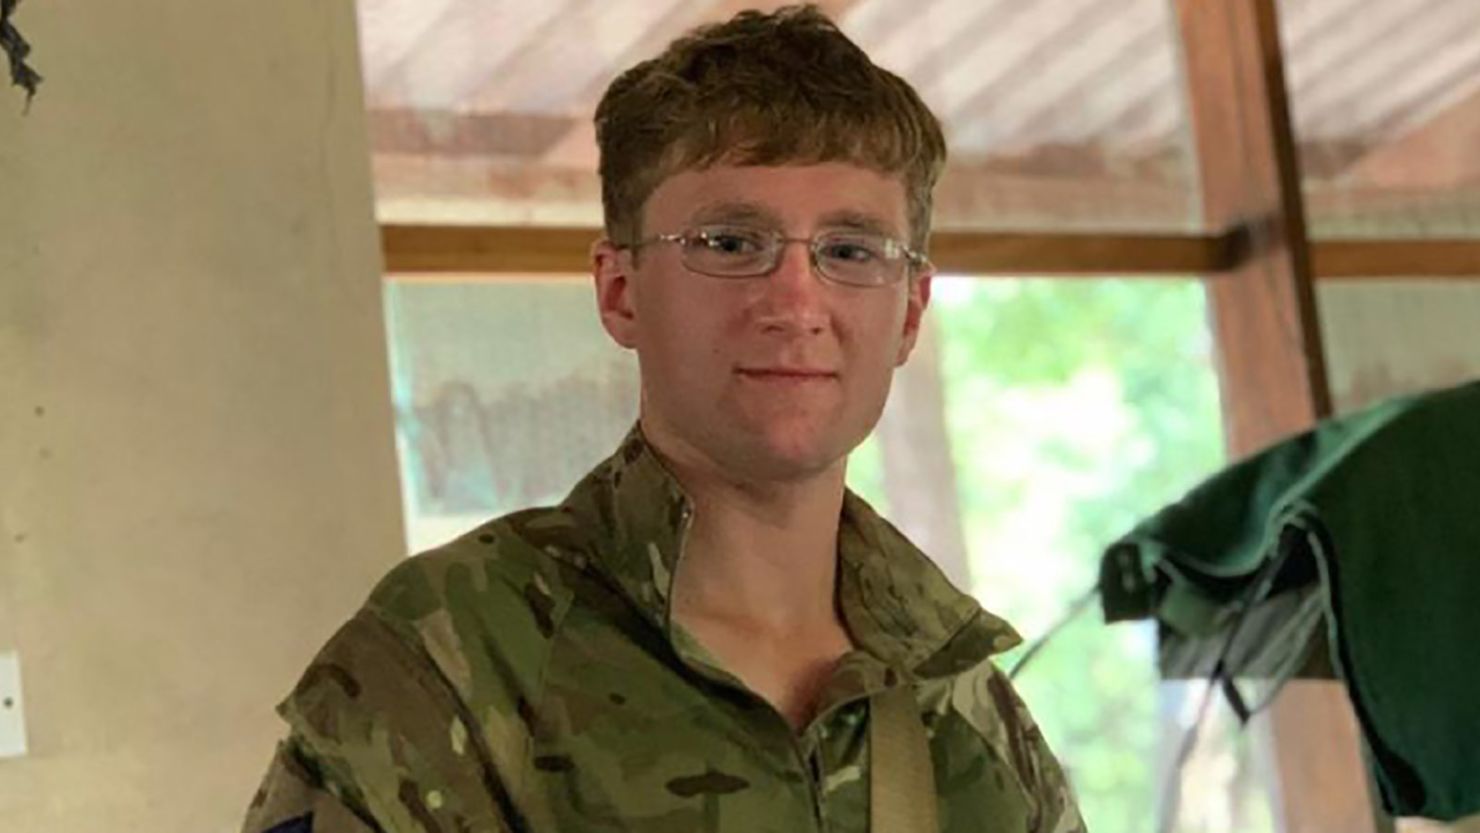 The United Kingdom's Ministry of Defense has confirmed British soldier Mathew Talbot died during a counter-poaching operation in Malawi.